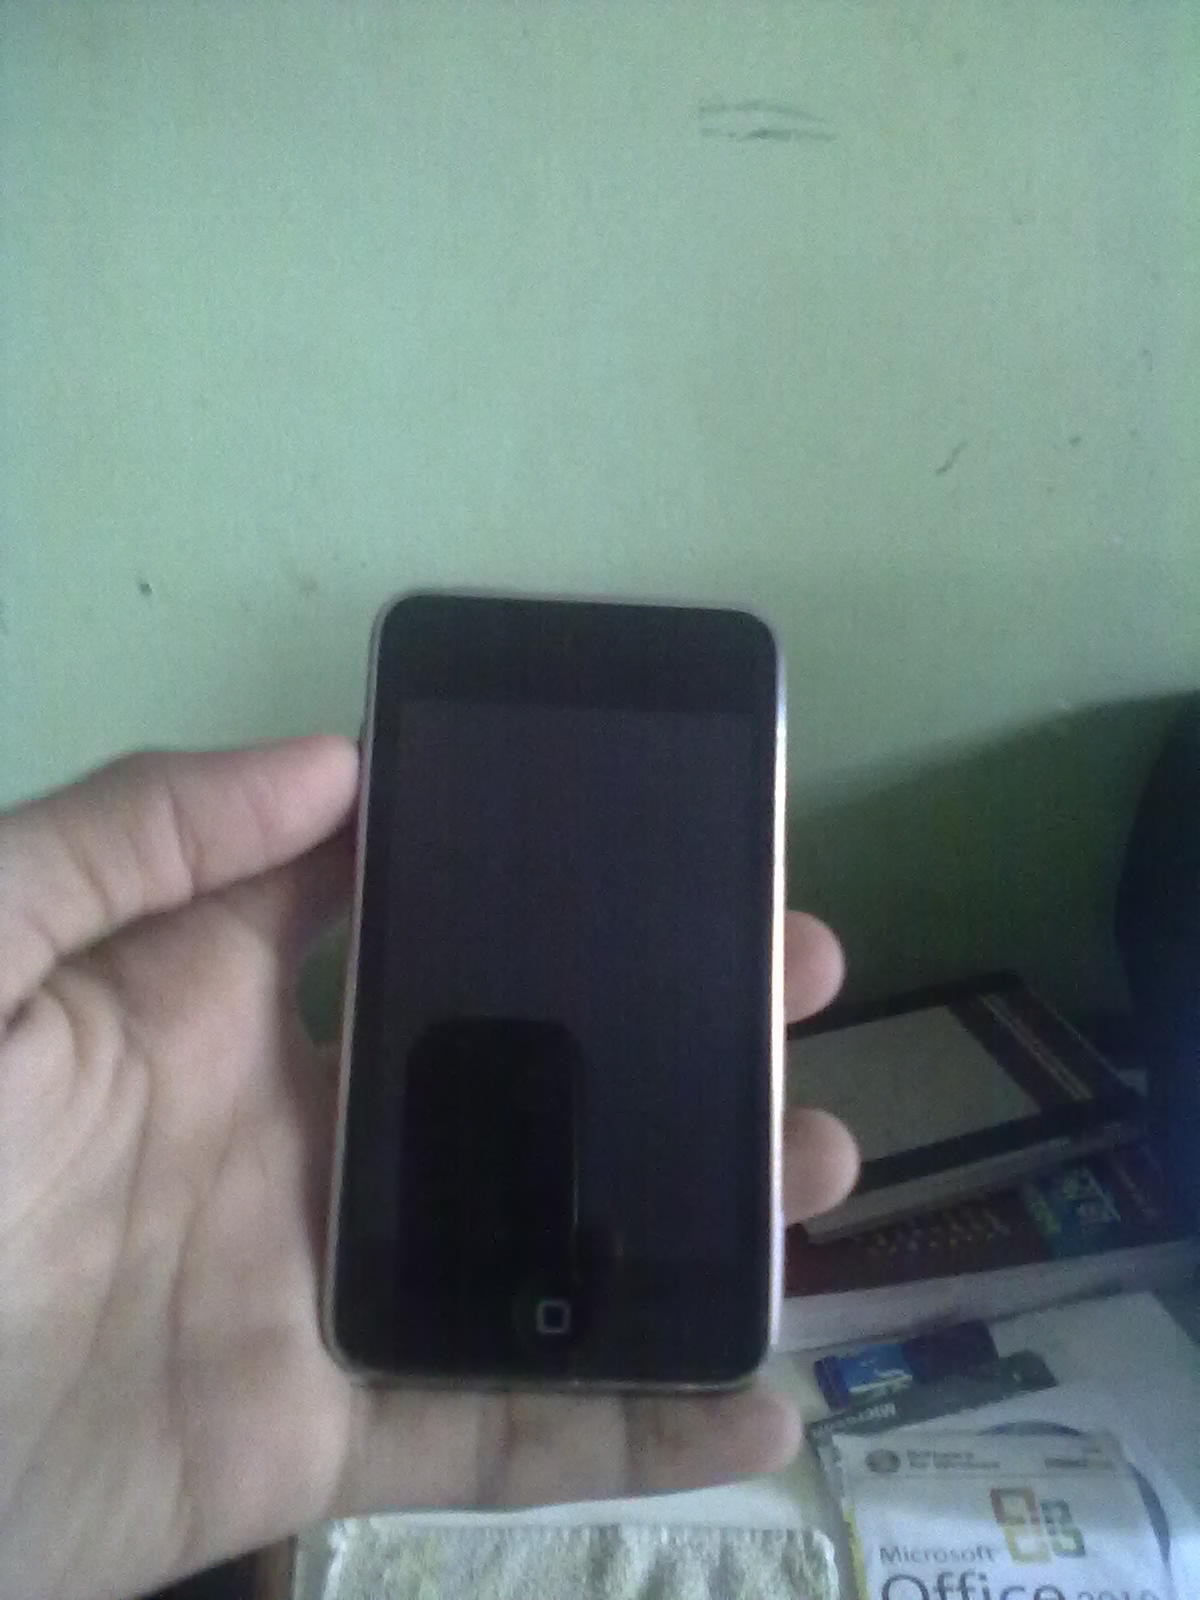 Ipod touch 2nd gen 8g n 3rd gen 32g for sell 1700tk  large image 1